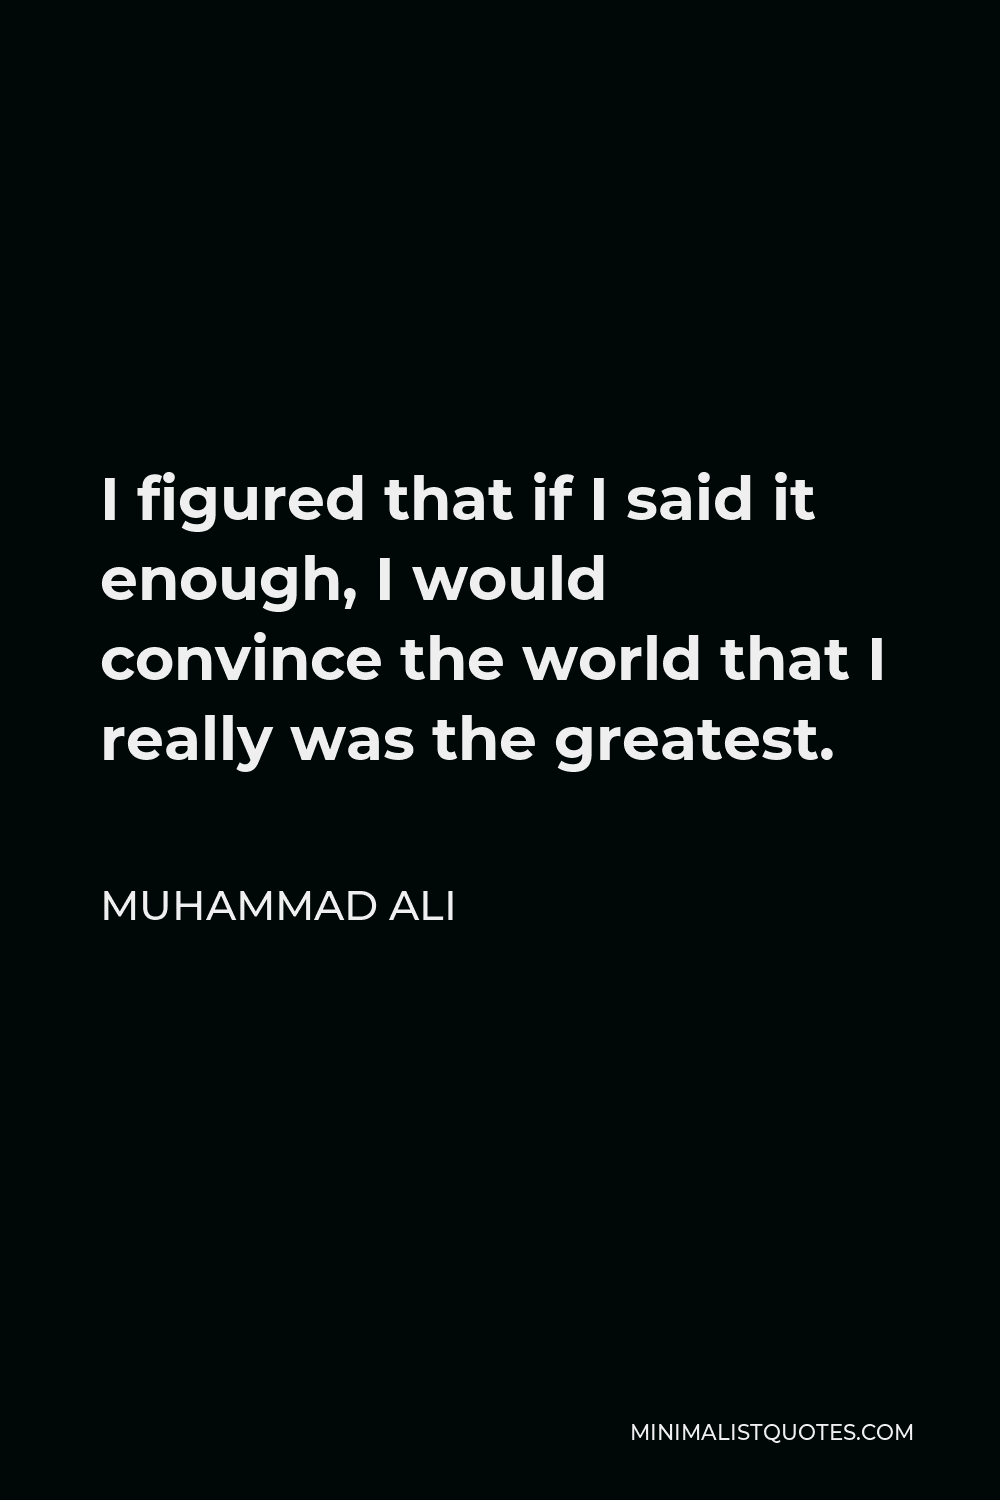 Muhammad Ali Quote: I figured that if I said it enough, I would ...